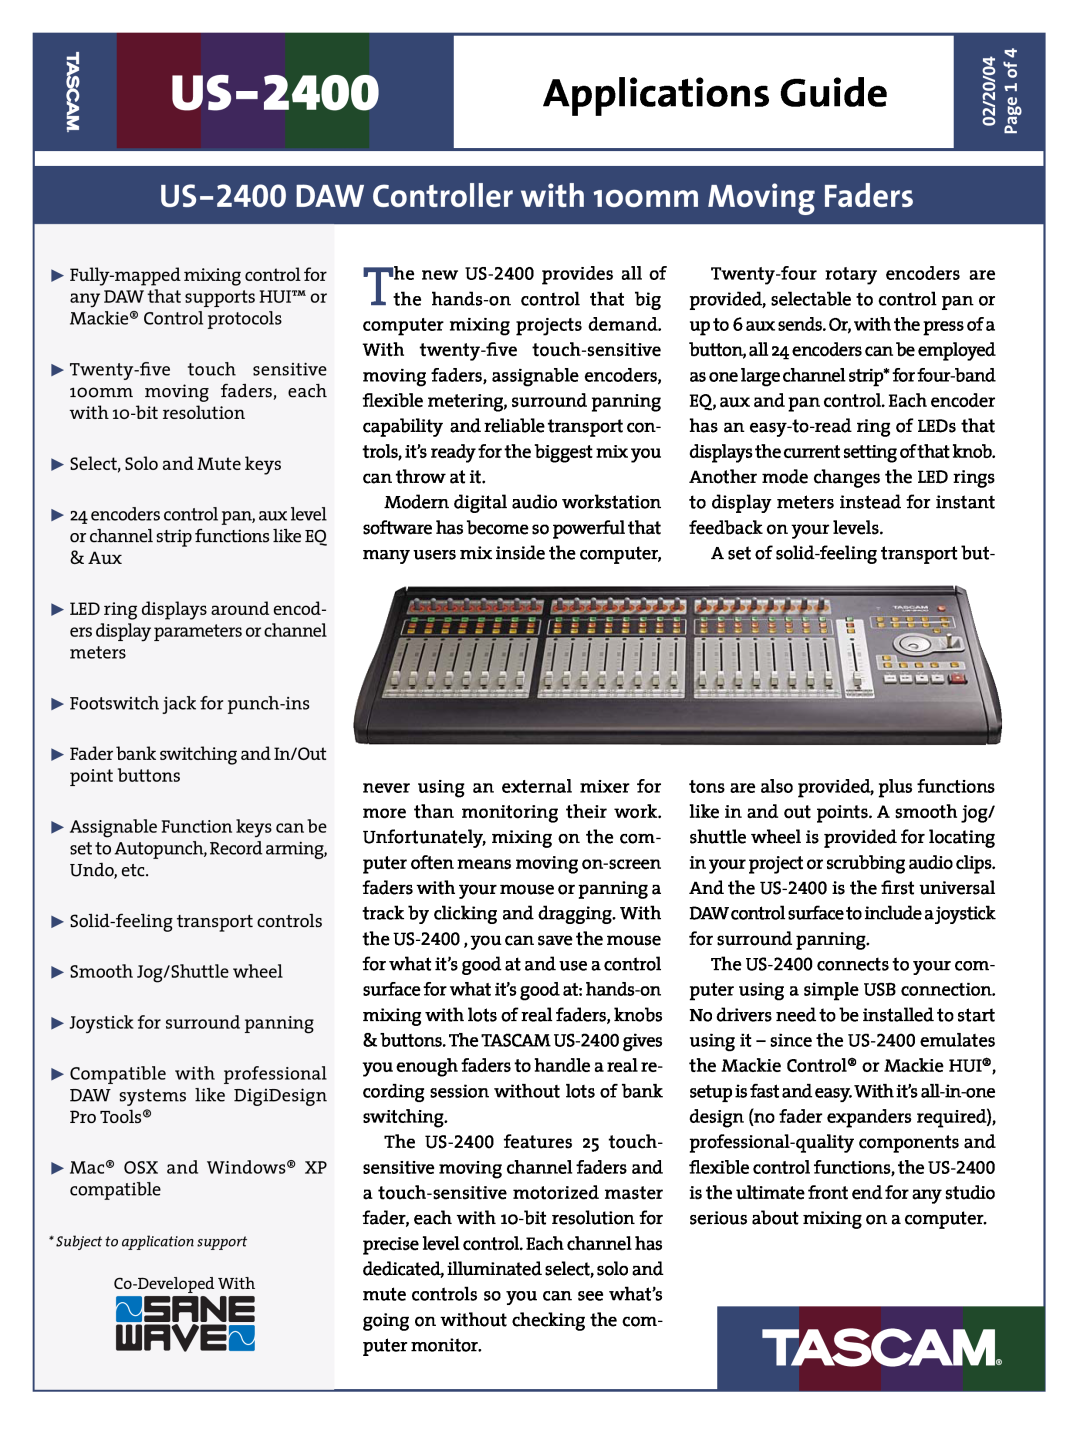 Tascam manual Applications Guide, US-2400 DAW Controller with 100mm Moving Faders 